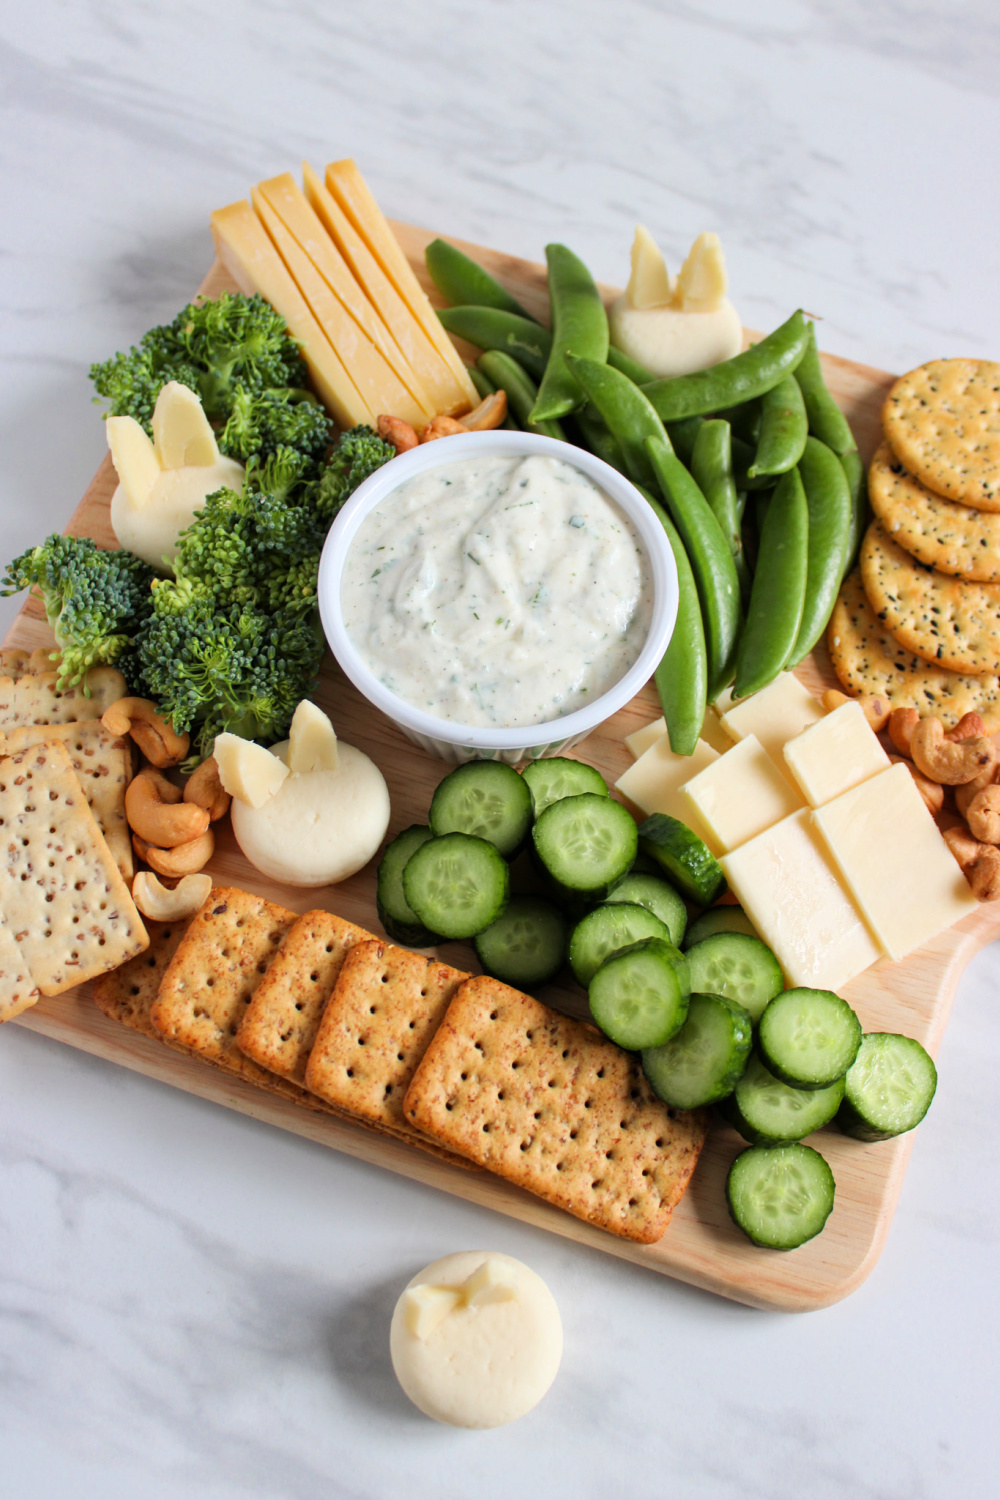 look down on the spring charcuterie board is the dip in the center surrounded by green vegetables, crackers and cheese made to look like bunnies.